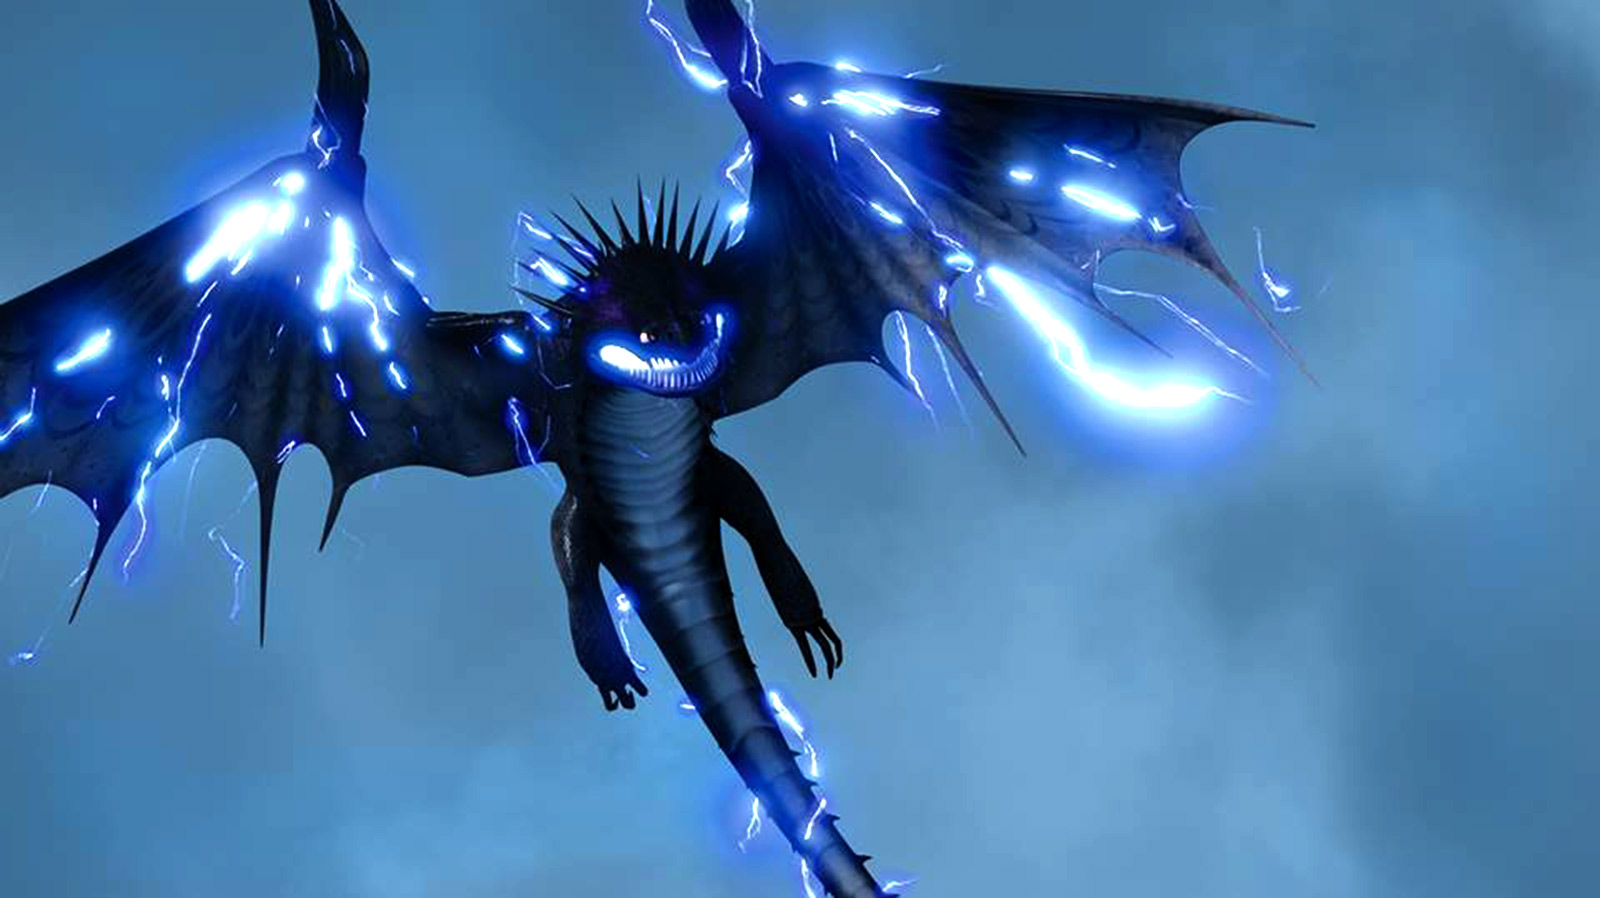  nightfury wallpaper how to train your dragon 2 pictures wallpapers 1600x898